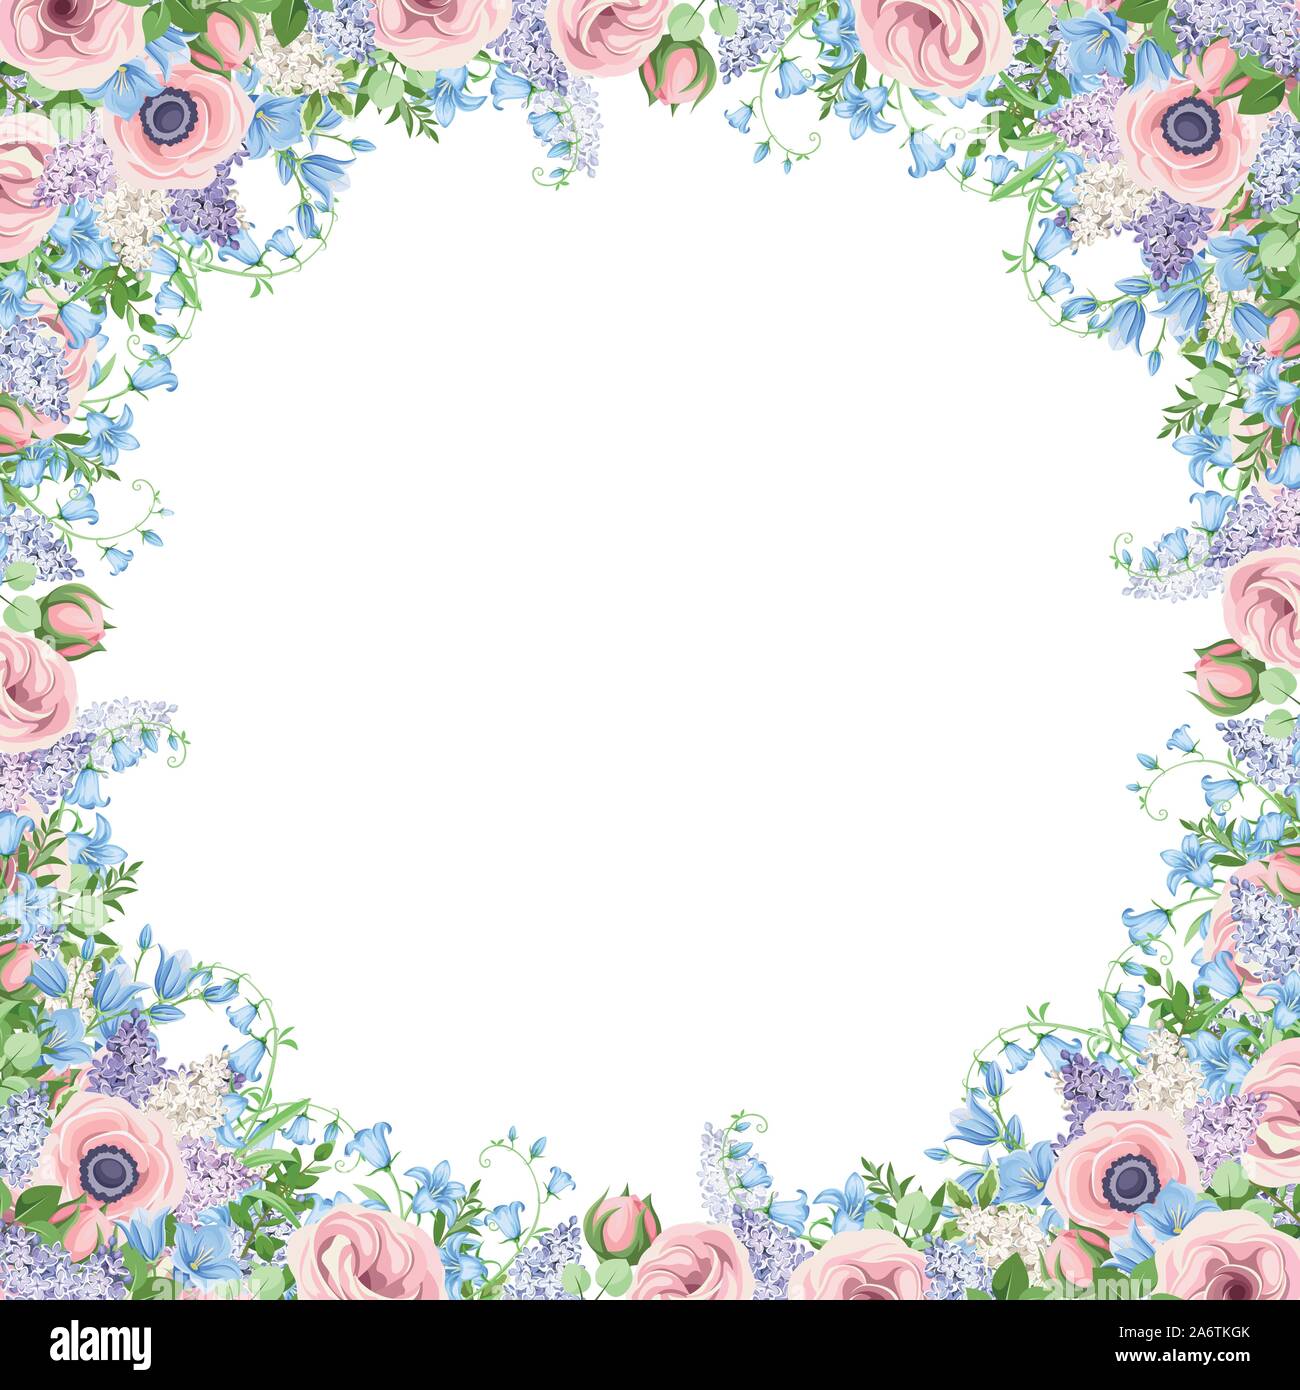 Vector background frame with pink, blue and purple flowers. Stock Vector